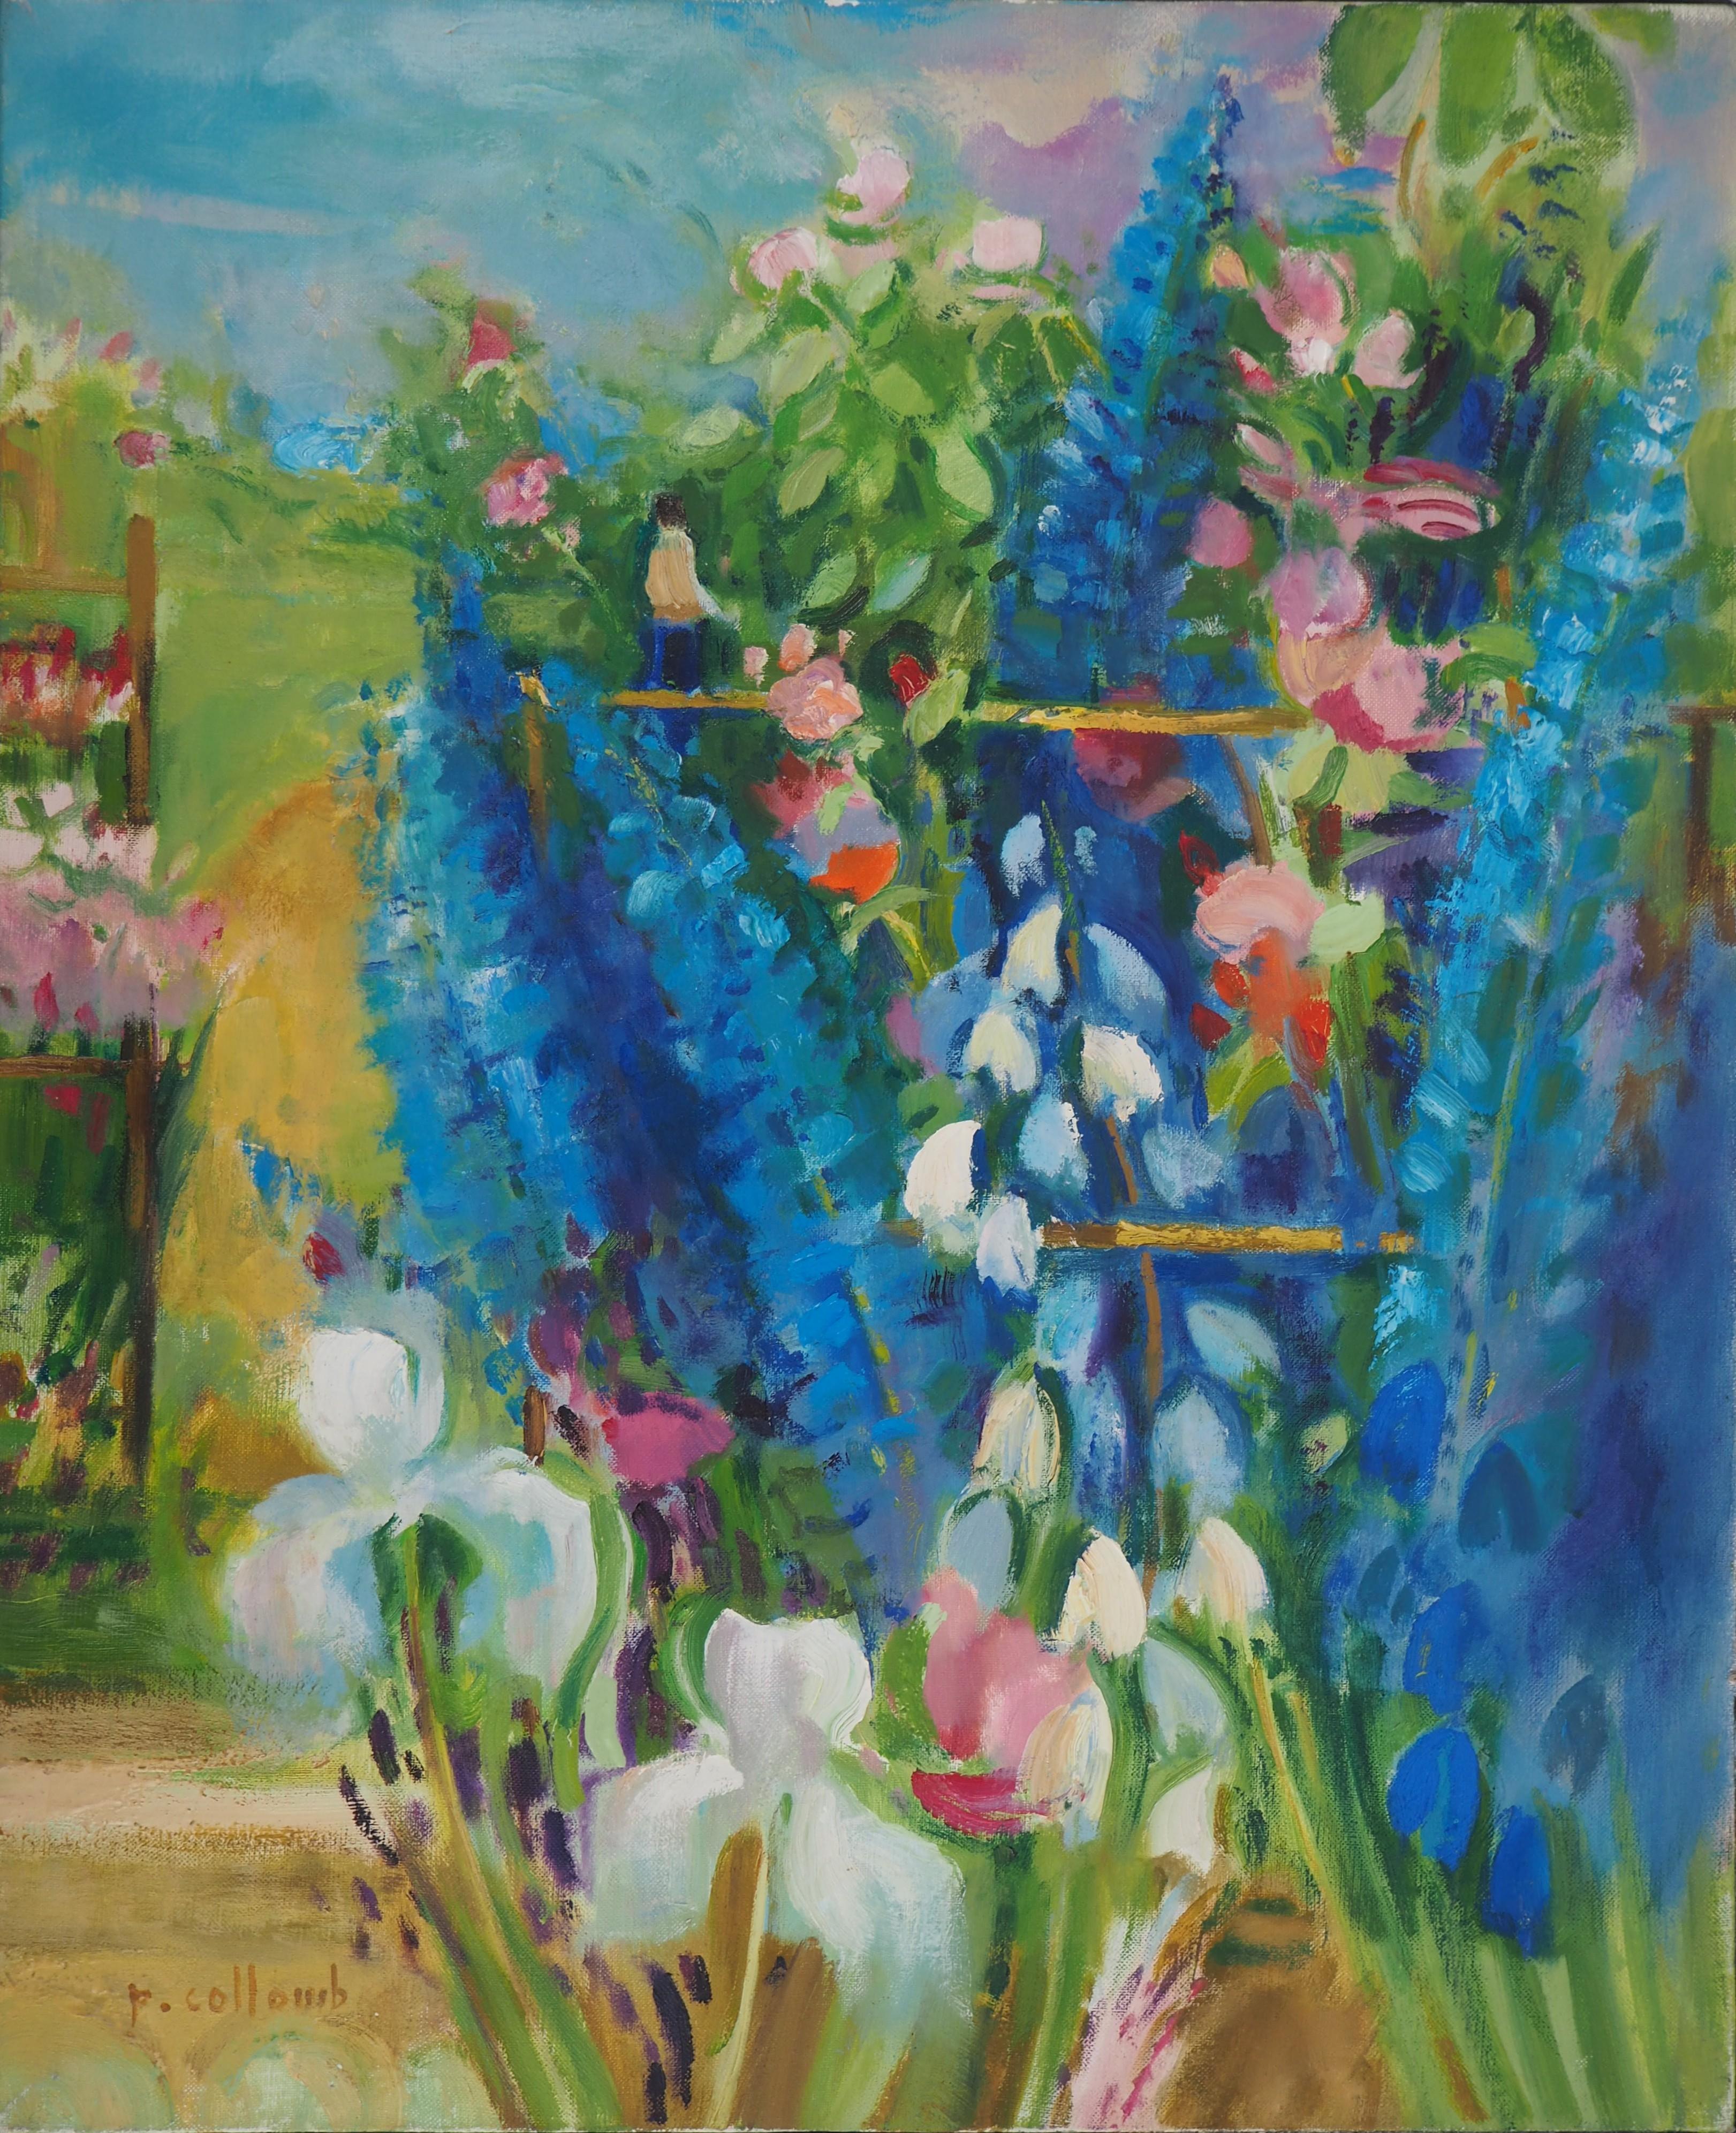 Paul Collomb Landscape Painting – Garden : White Irises and Delphiniums - Original Oil Painting, Handsigned